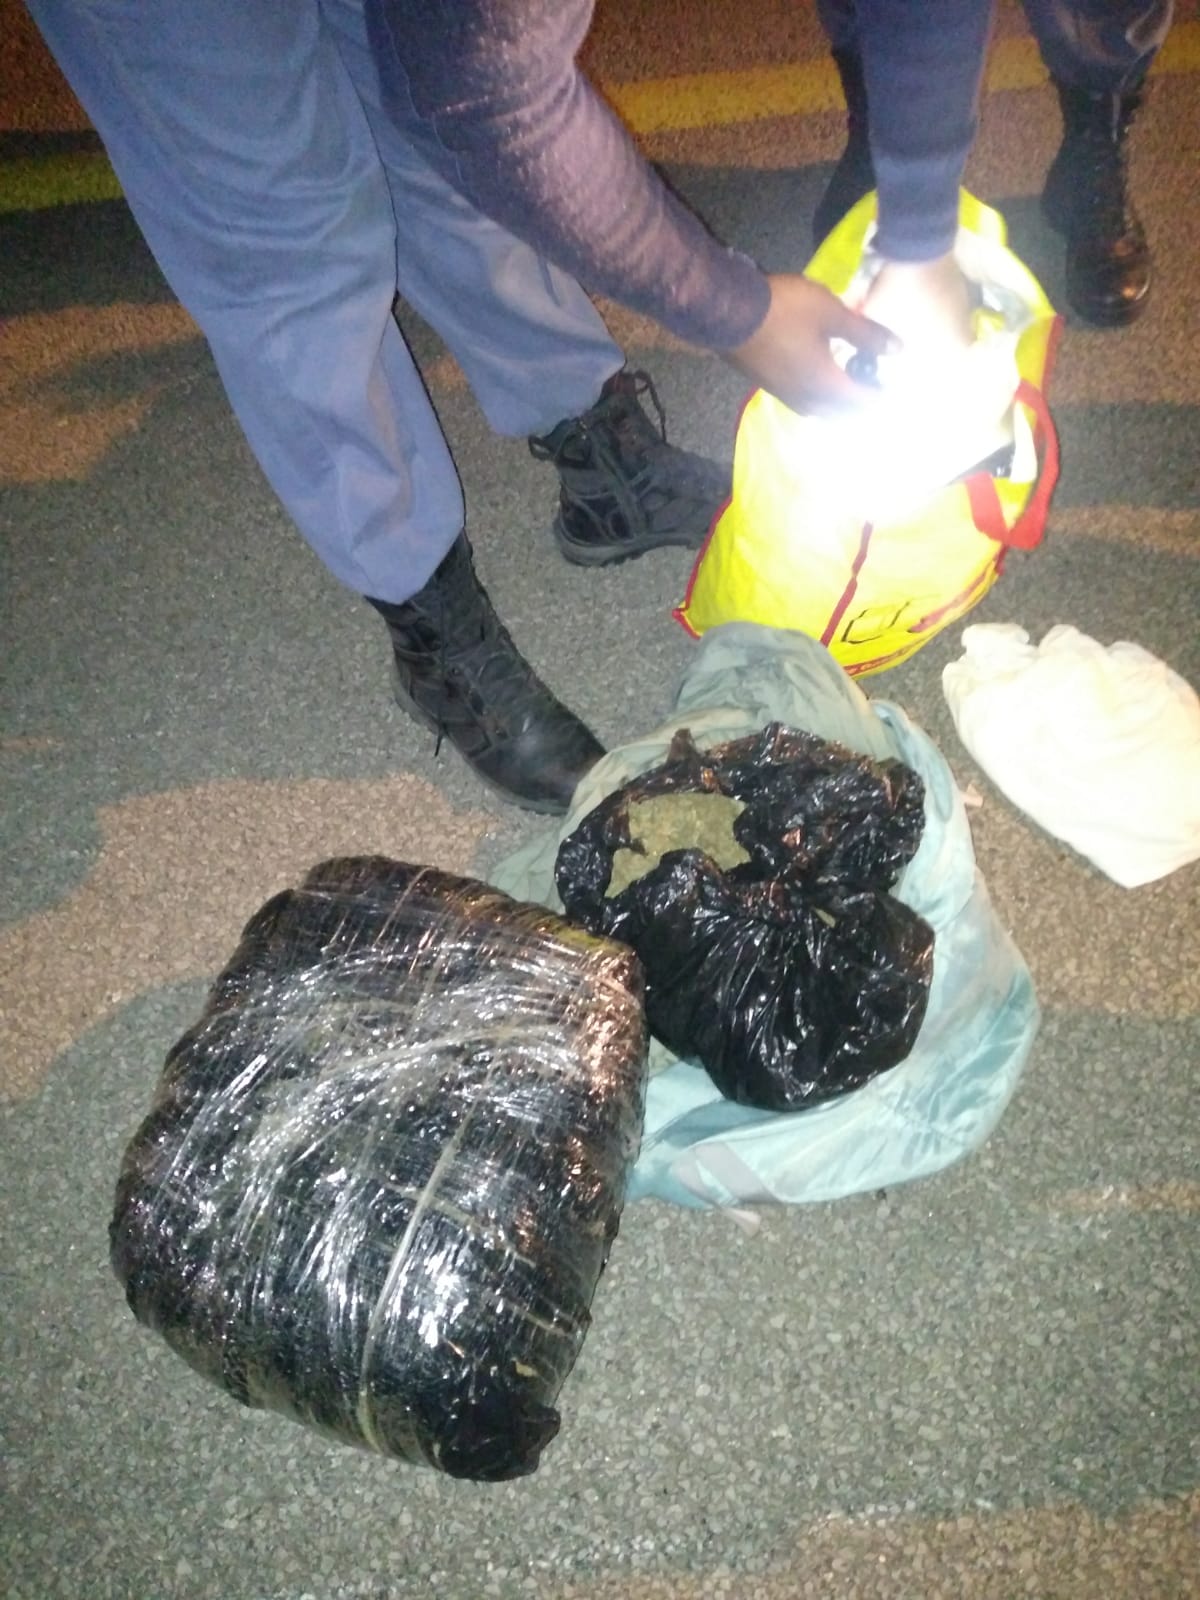 A woman was detained on a charge of dealing in dagga - Eastern Cape